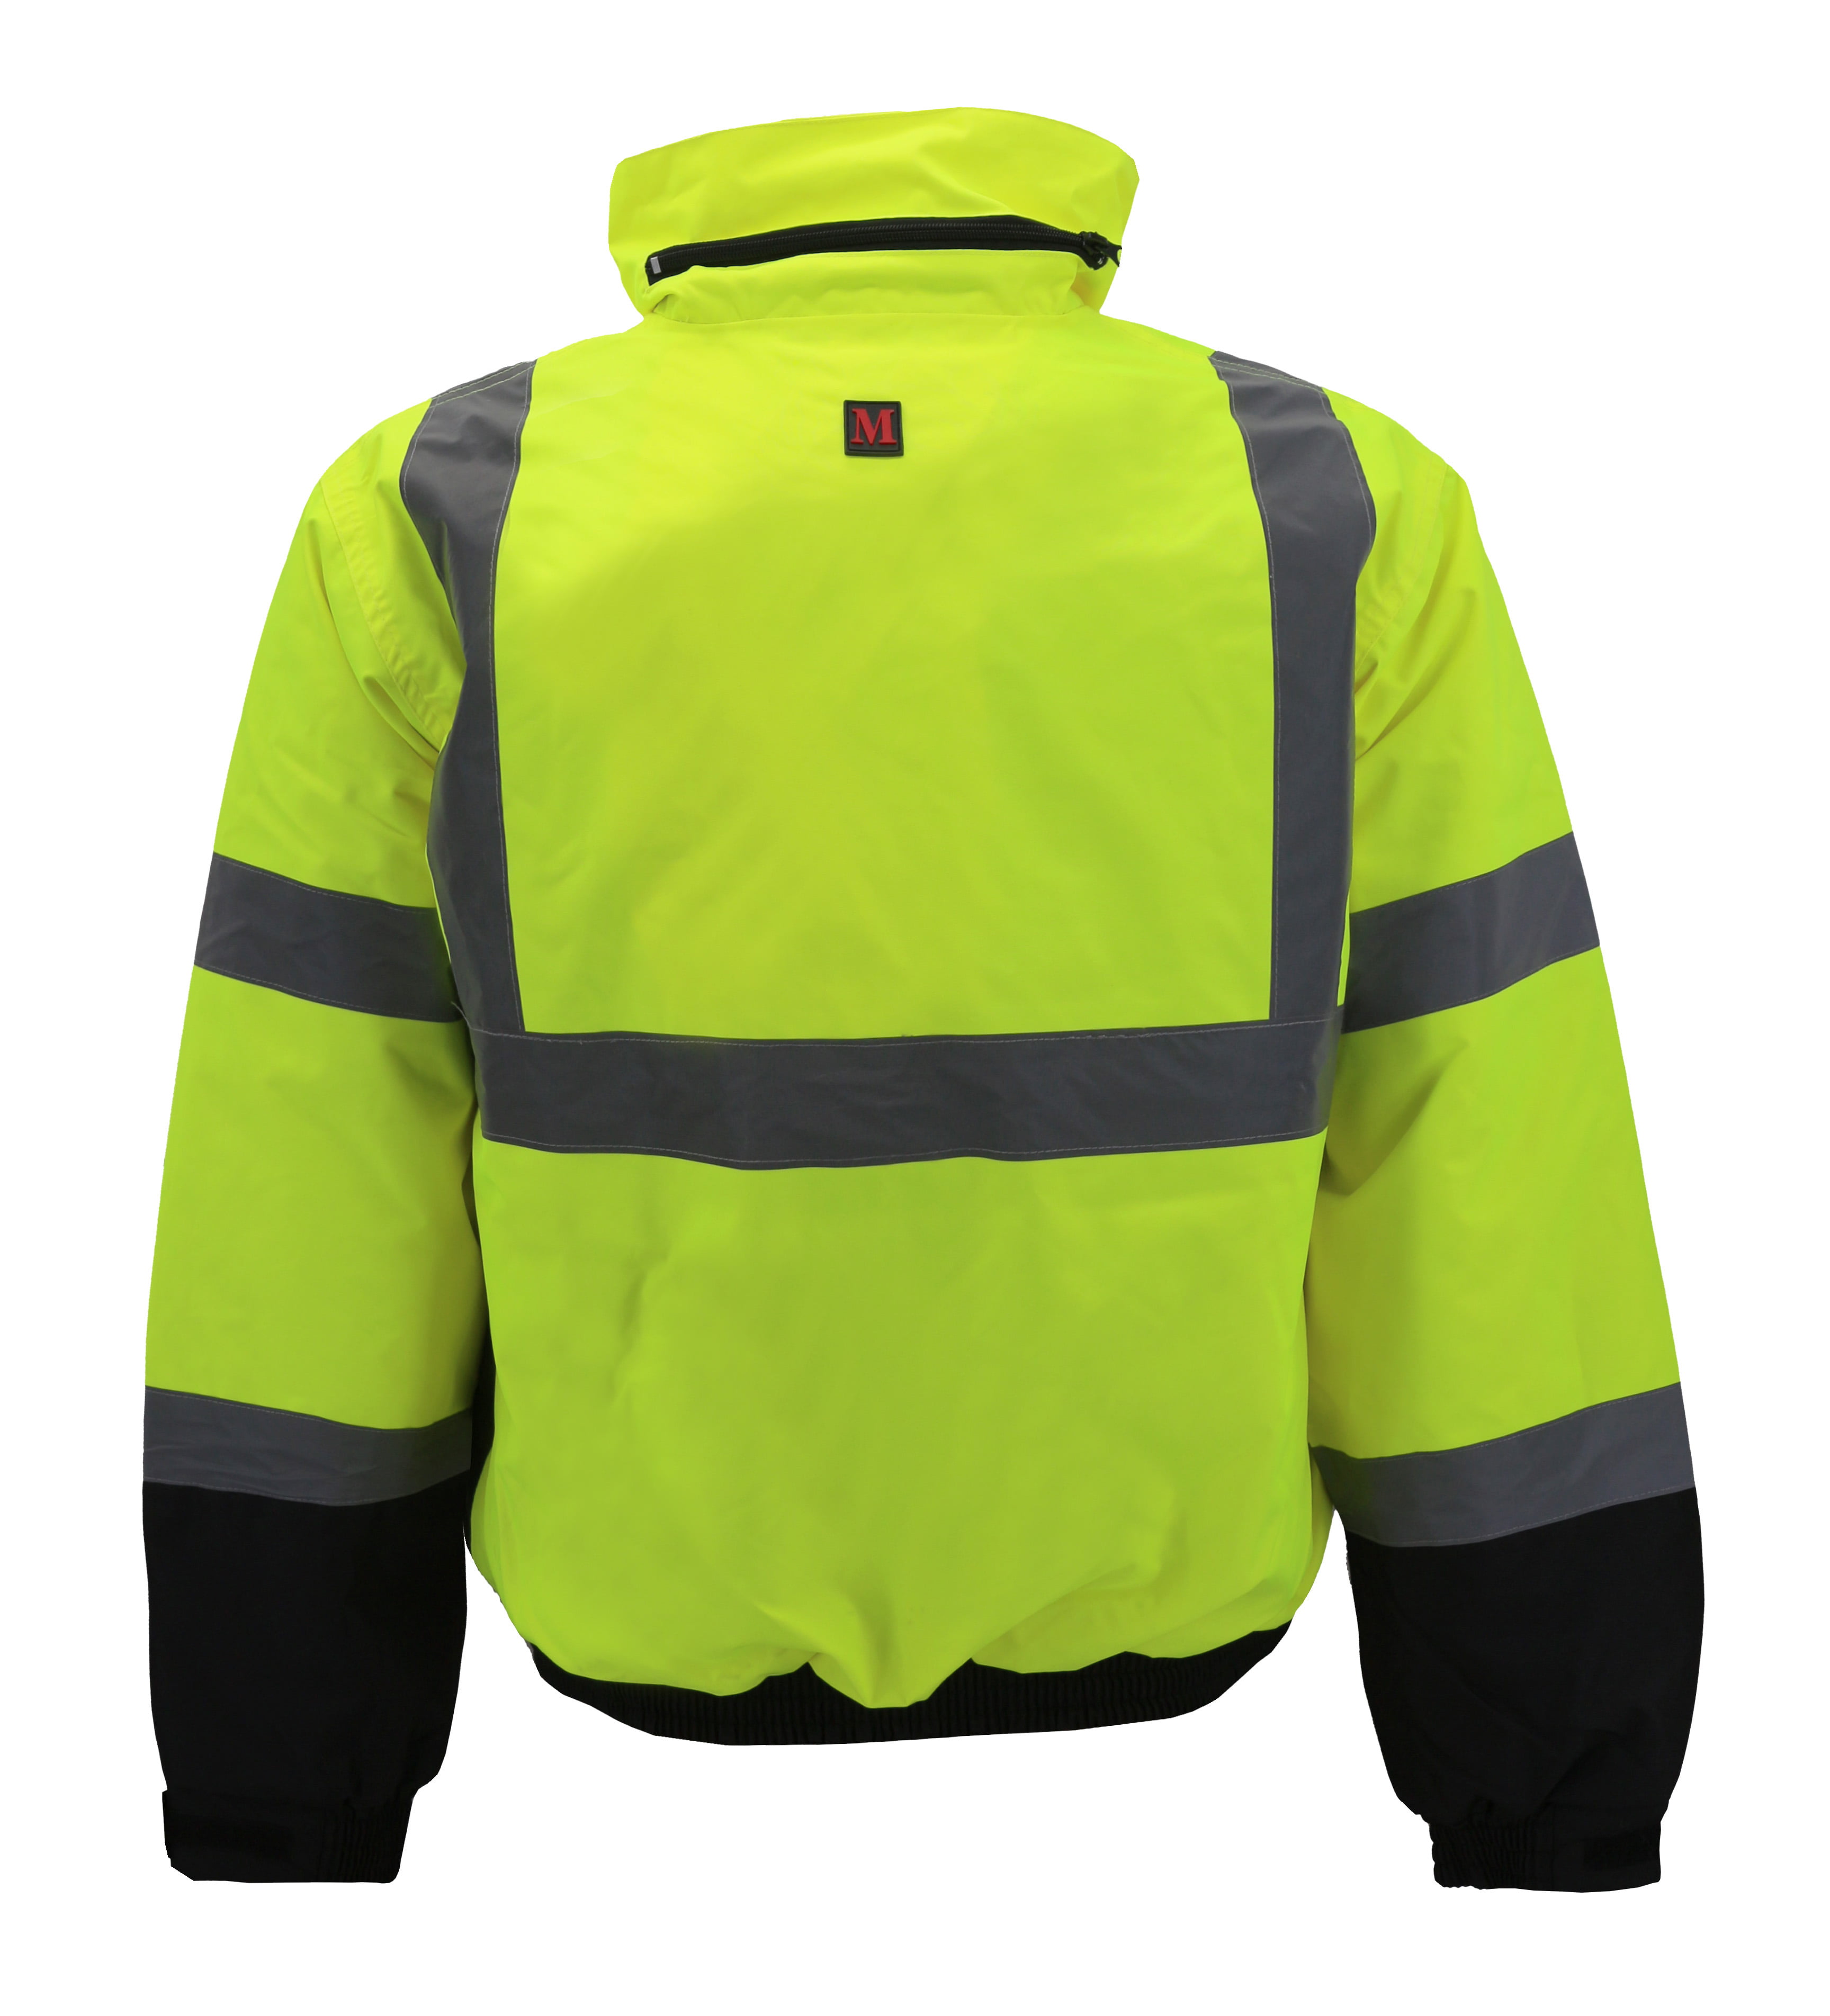 Uno Mejor Hi Vis Jackets for Men, Safety Jackets with Pockets for Men&  Women, Reflective Construction Coats for Cold Weather Winter, Waterproof  High Vis Rain Gear, Class 3, Yellow-Black, XL 